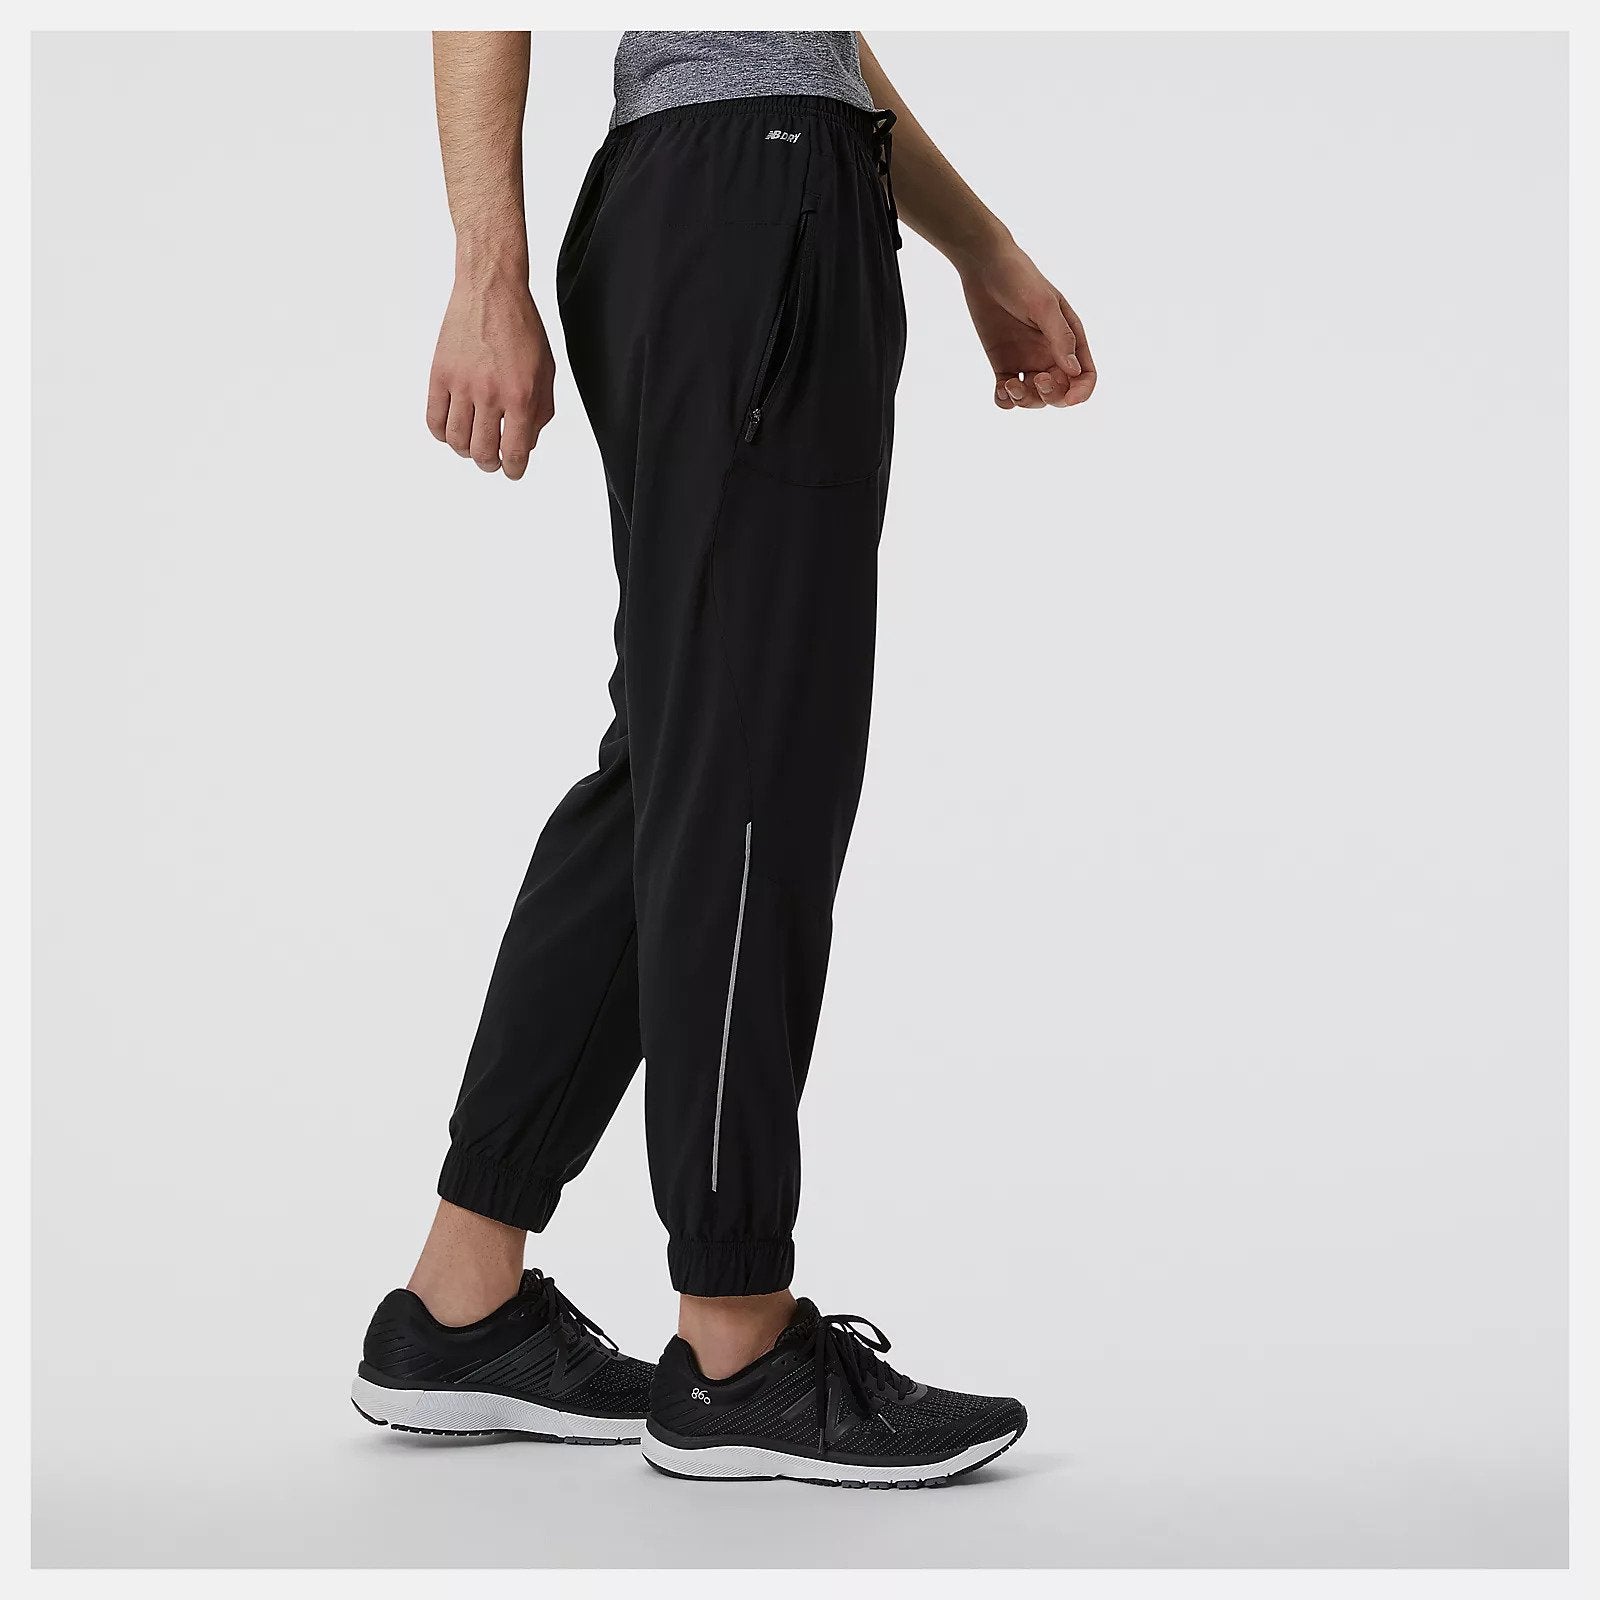 Side view of the Men's Impact Run Woven Pant by New Balance in Black